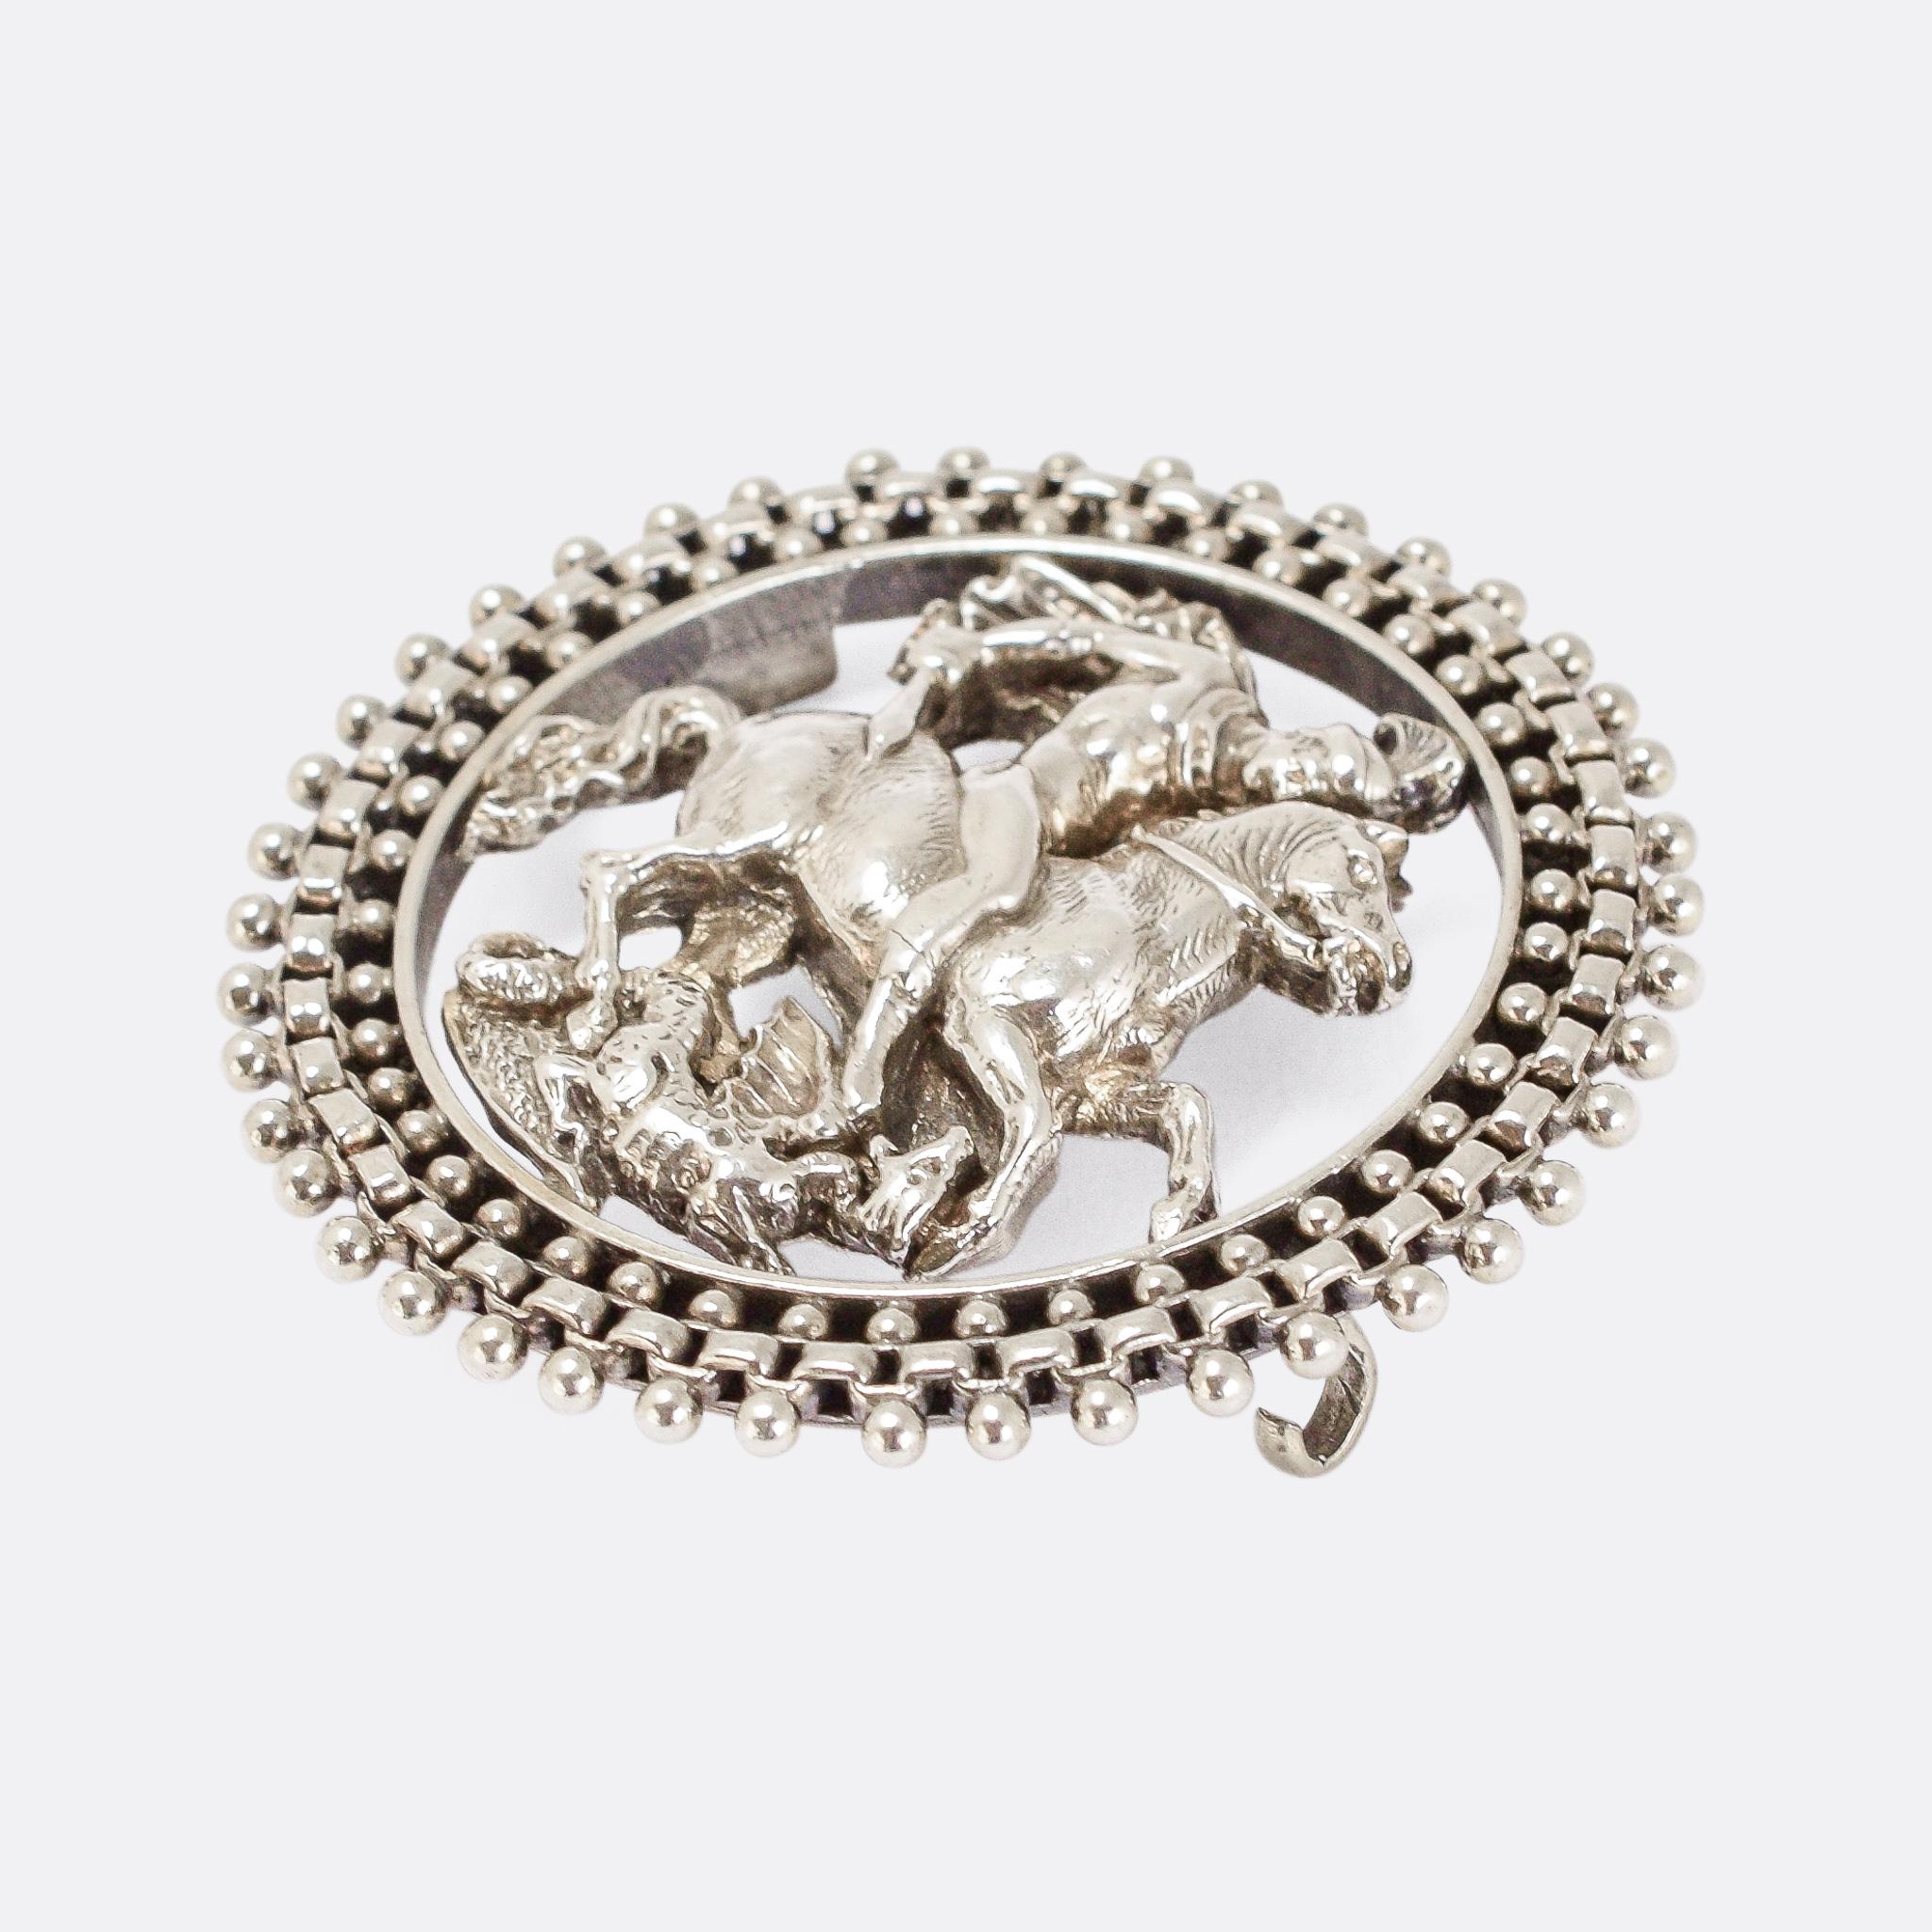 A cool antique brooch depicting the famous scene of St George slaying the Dragon (as featured on gold sovereigns). It's crafted in sterling silver and dates from the latter half of the 19th Century, with a particularly ingenious chain border (which